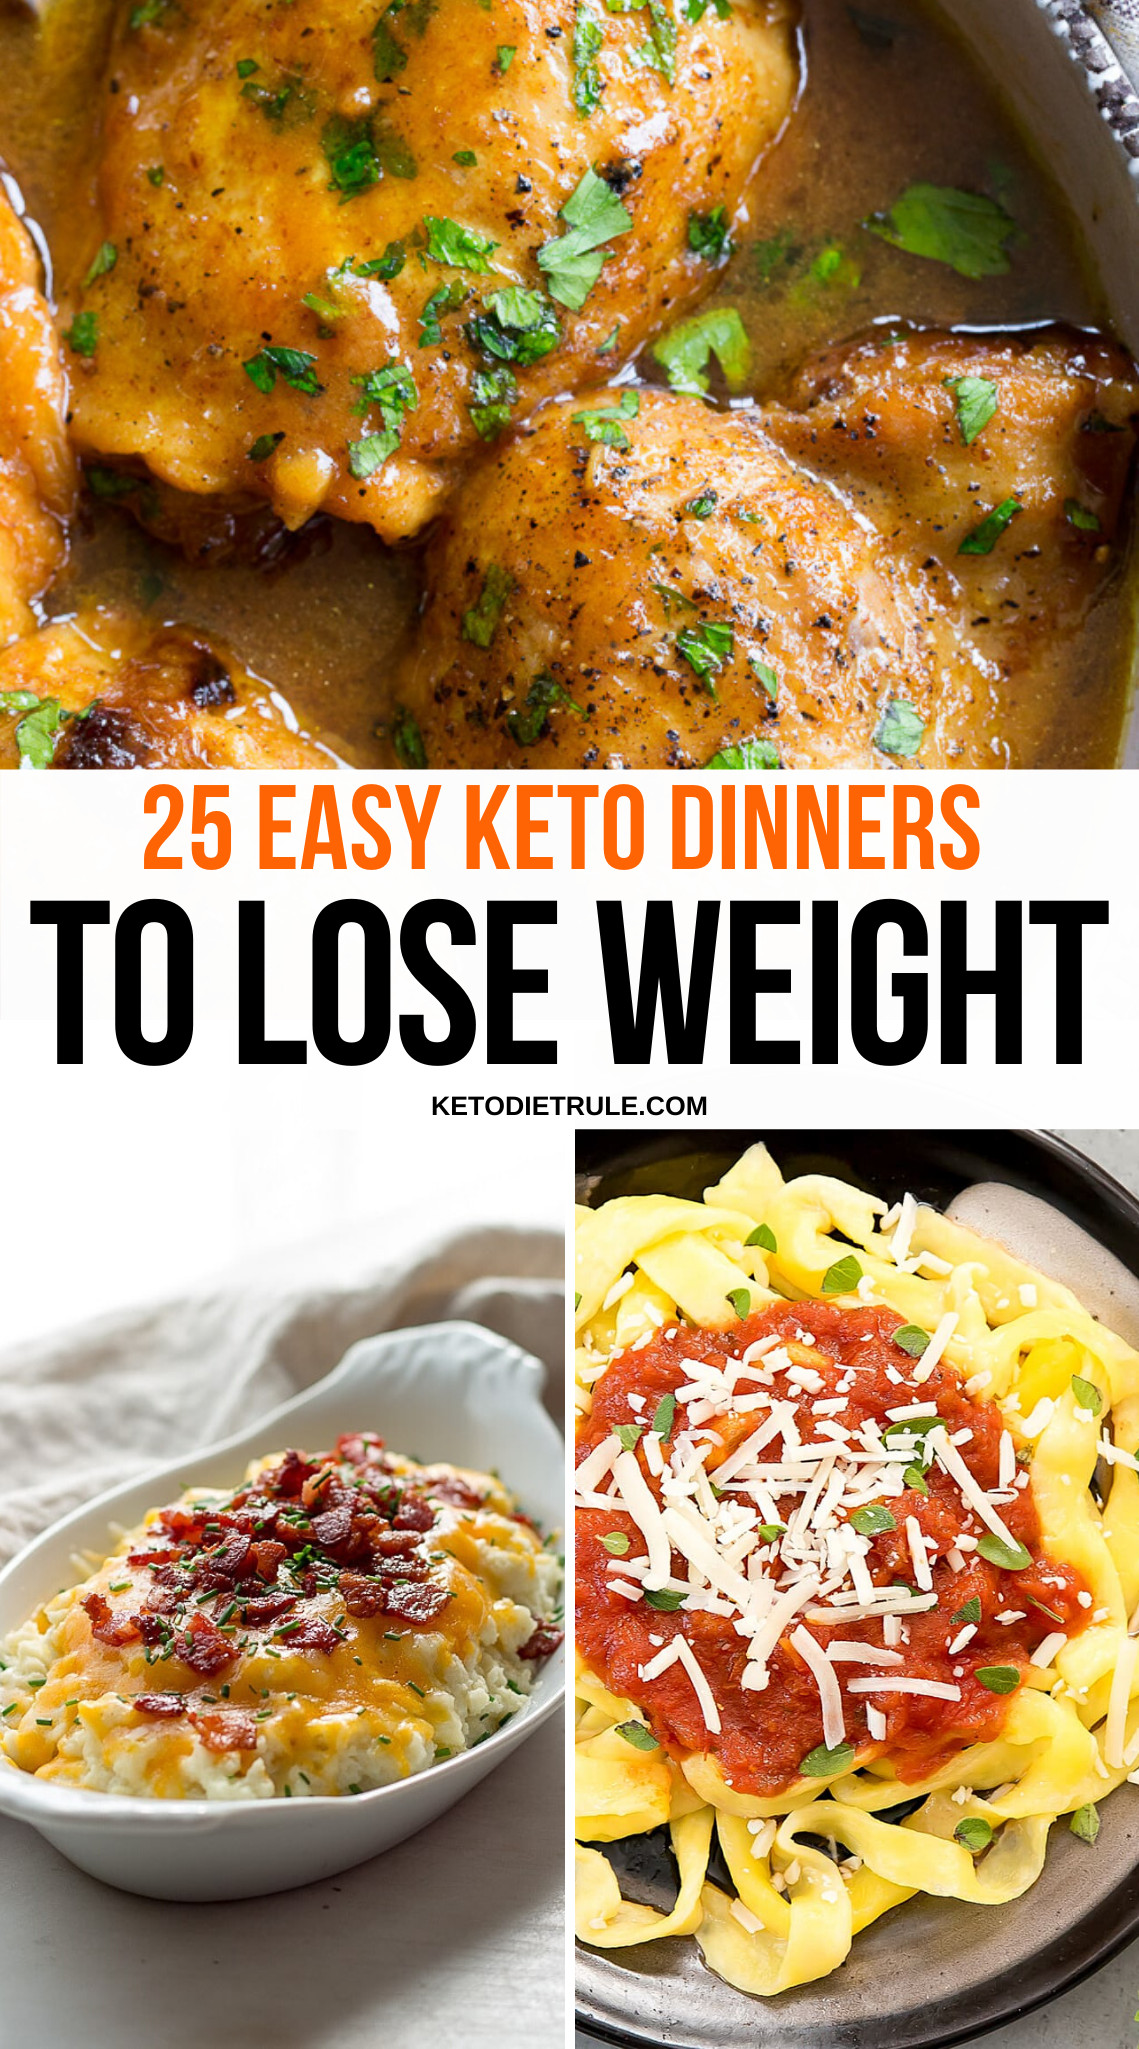 Healthy Keto Dinner Recipes For Weight Loss
 25 Quick & Easy Keto Dinner Recipes to Make Tonight in